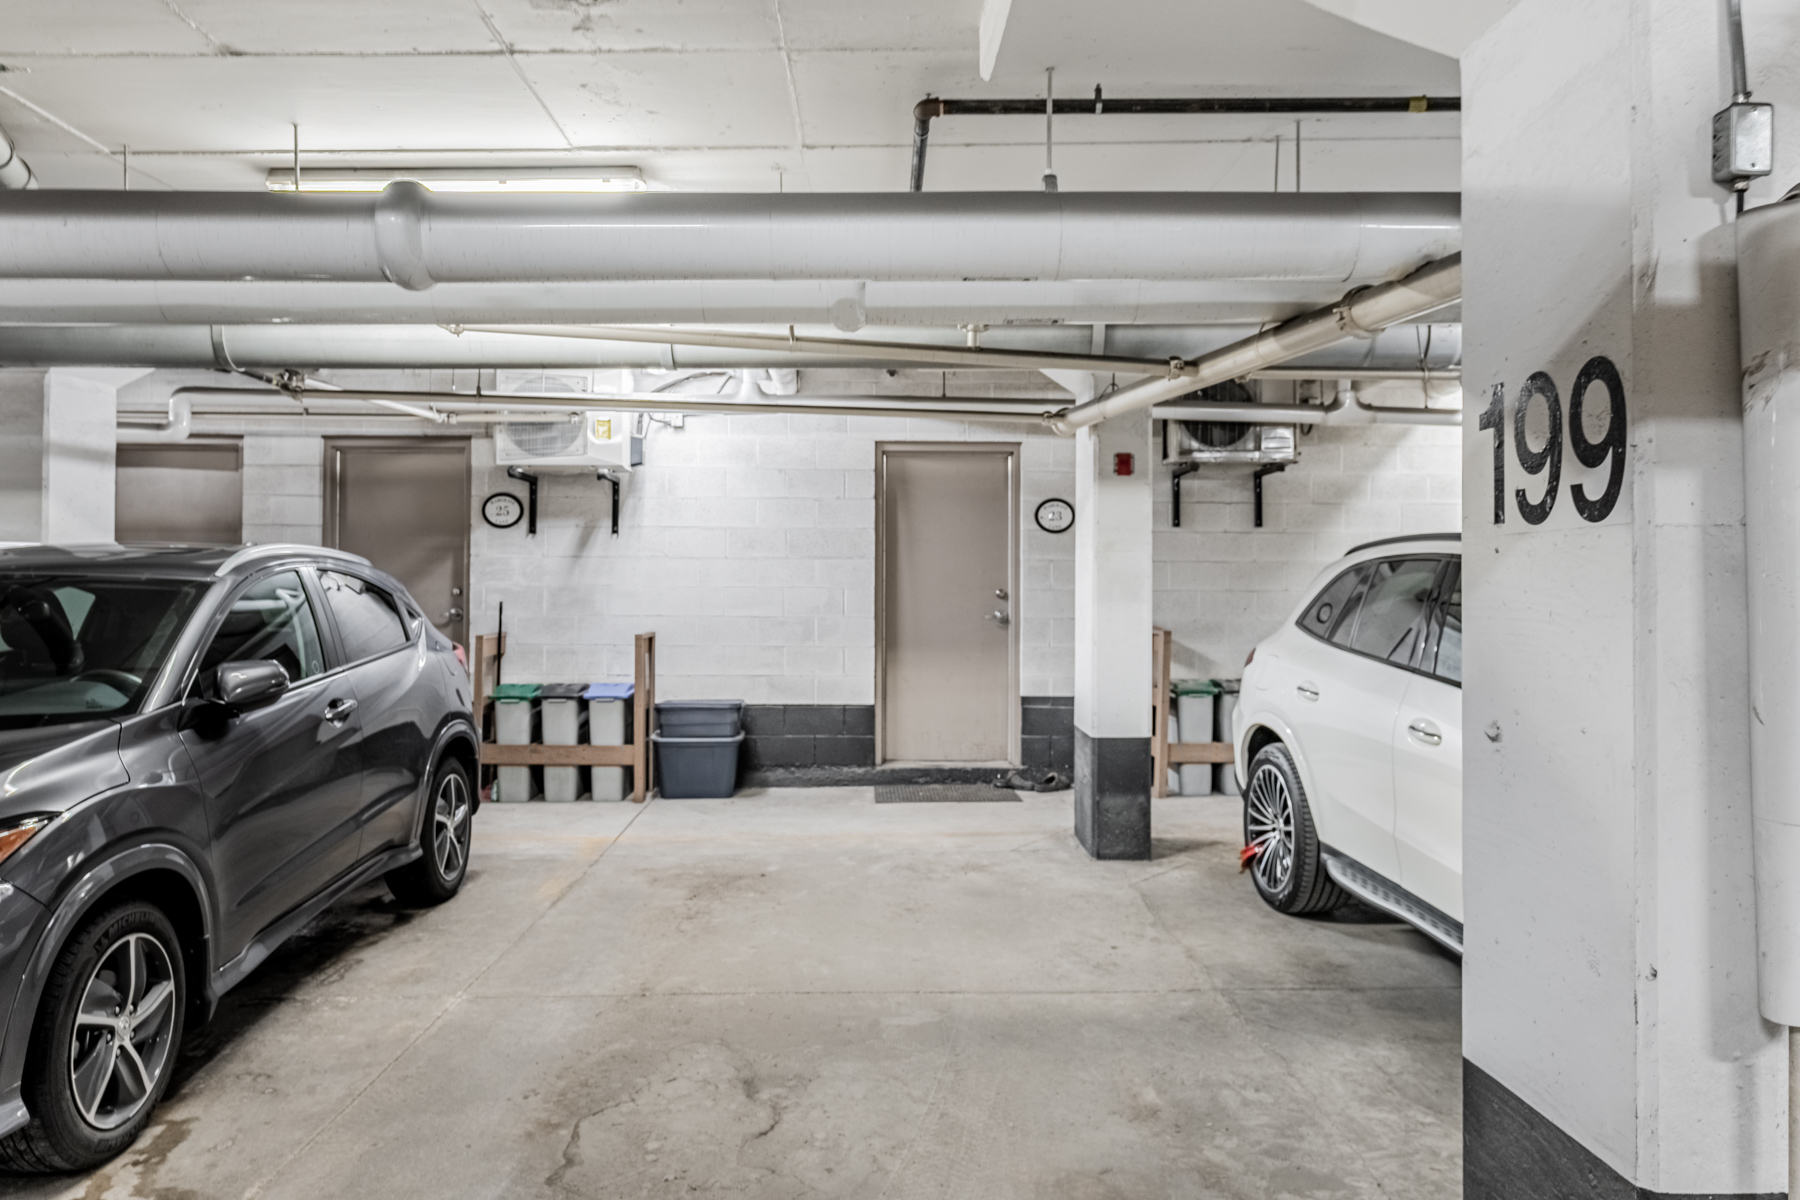 Underground parking spot with black and white vehicles.